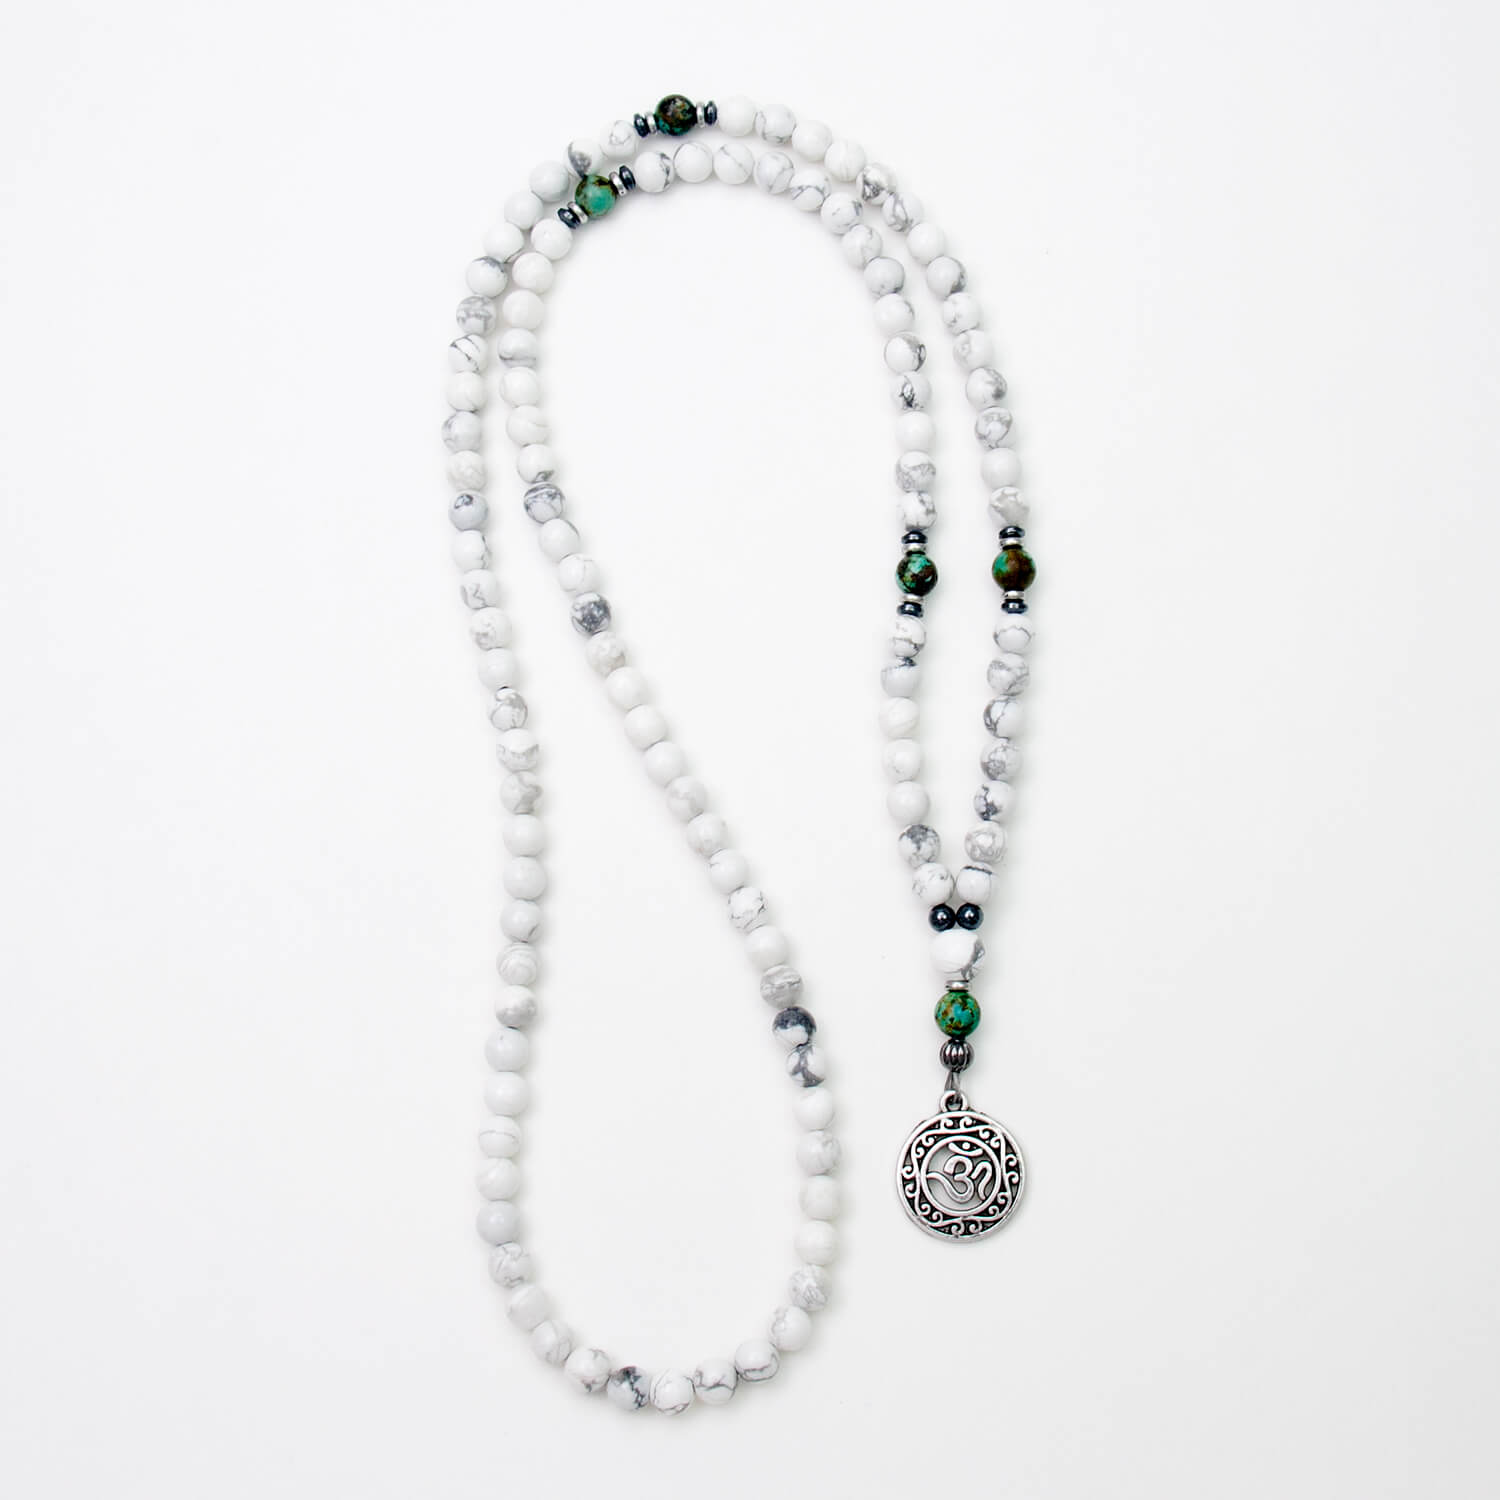 Om Mala Necklace, Howlite and African Turquoise